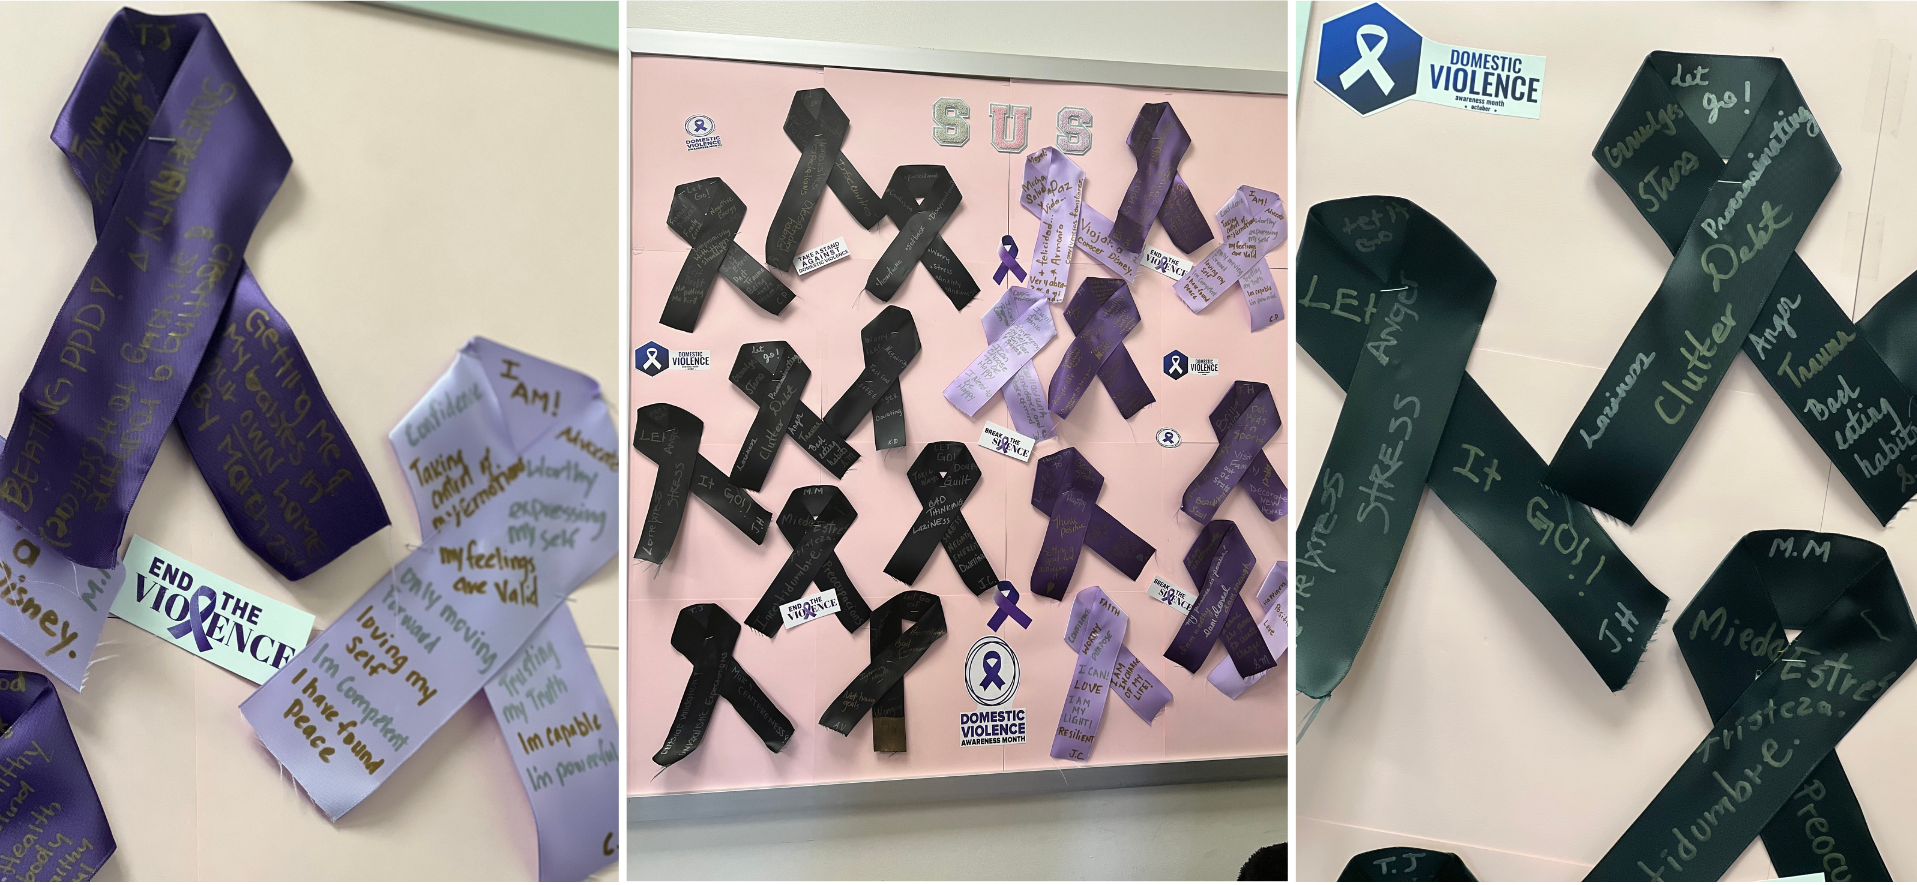 Domestic Violence Awareness Depicted in Empowering Ribbon Statements